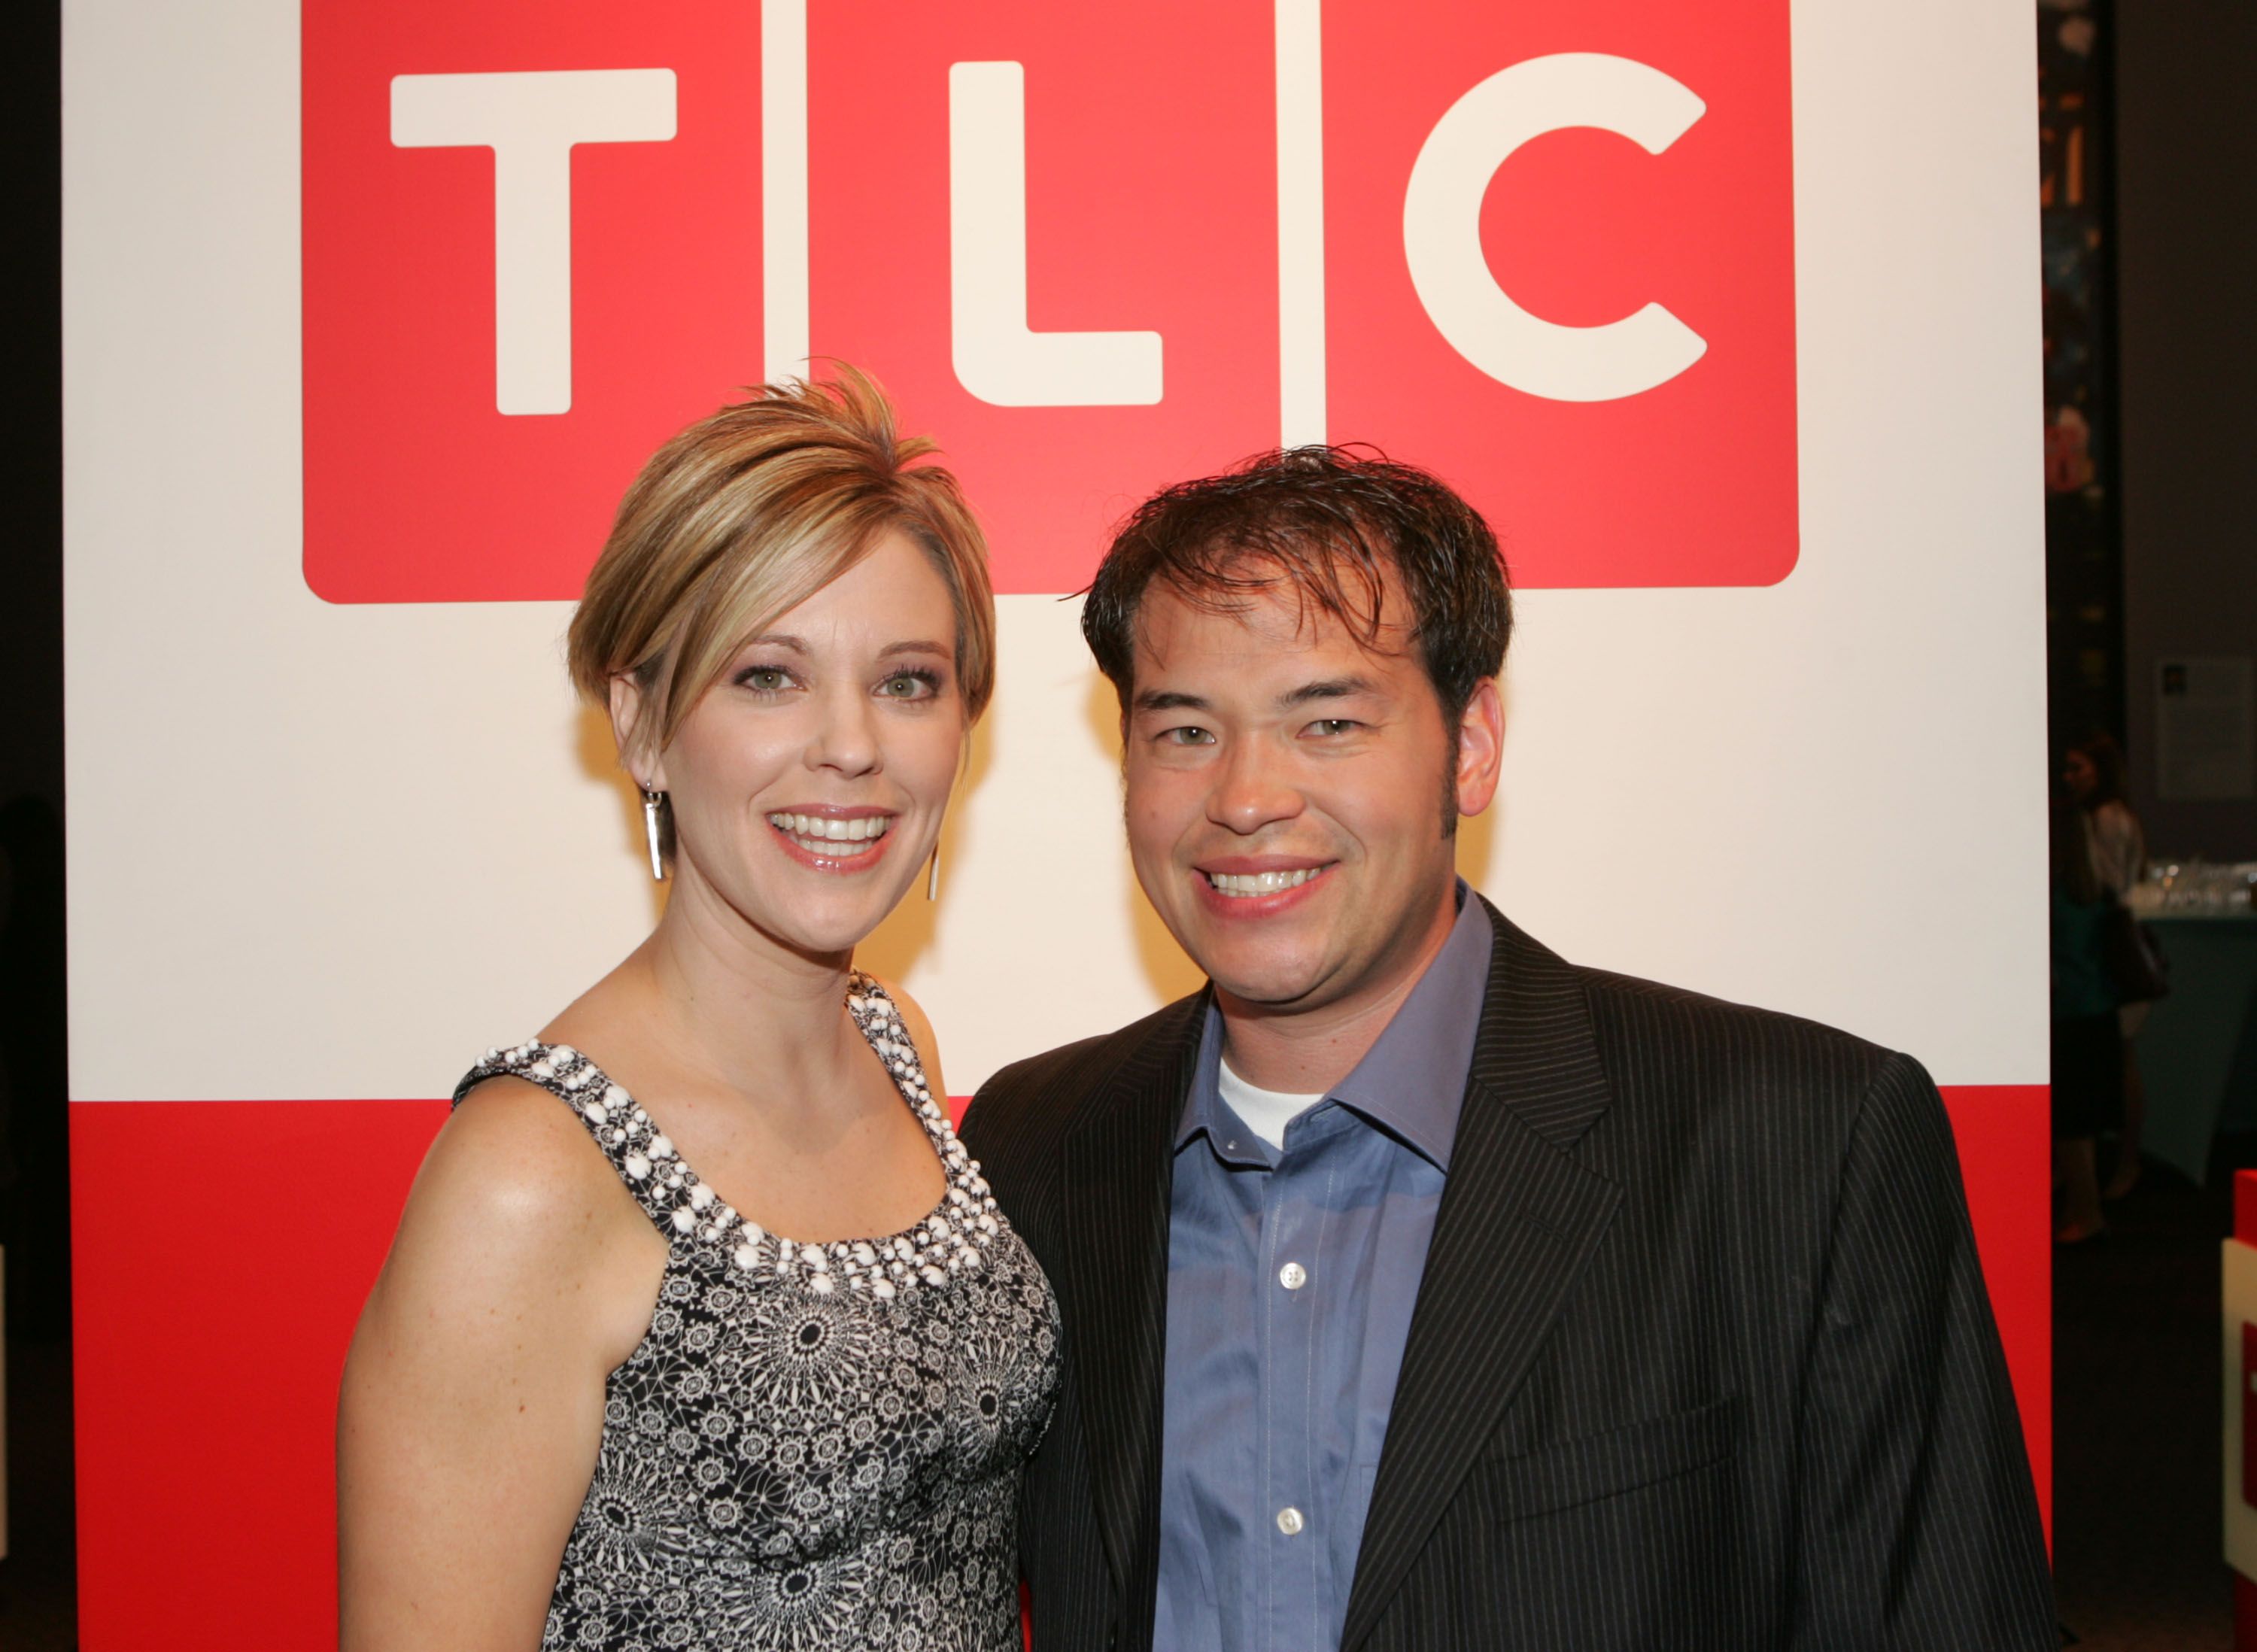 Kate and John Gosselin at the Discovery Upfront Presentation NY - Talent Images event on April 23, 2008, in New York City. | Source: Getty Images